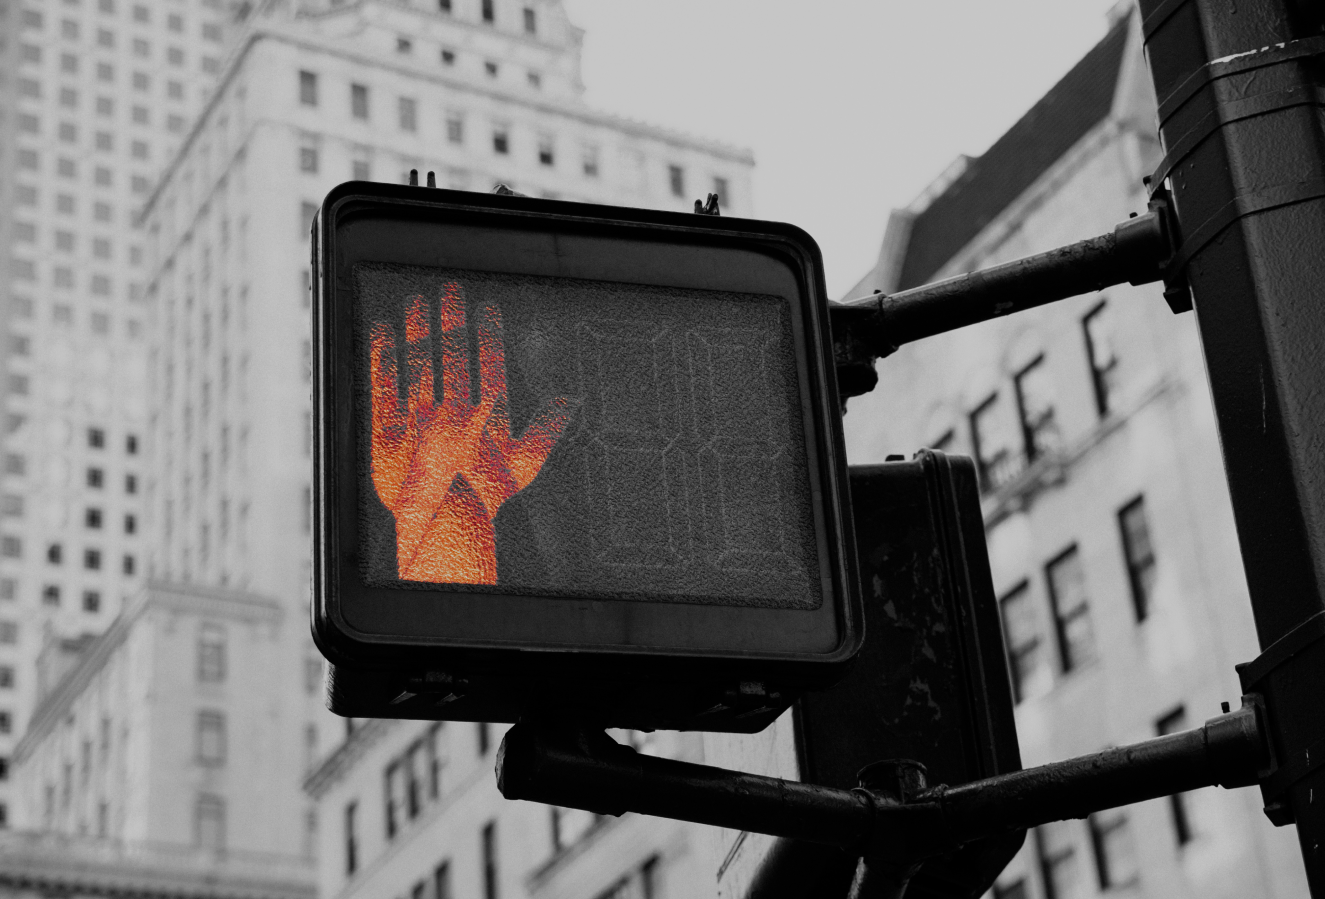 Image of a crossing walk sign showing highlighted red hand in black and white setting